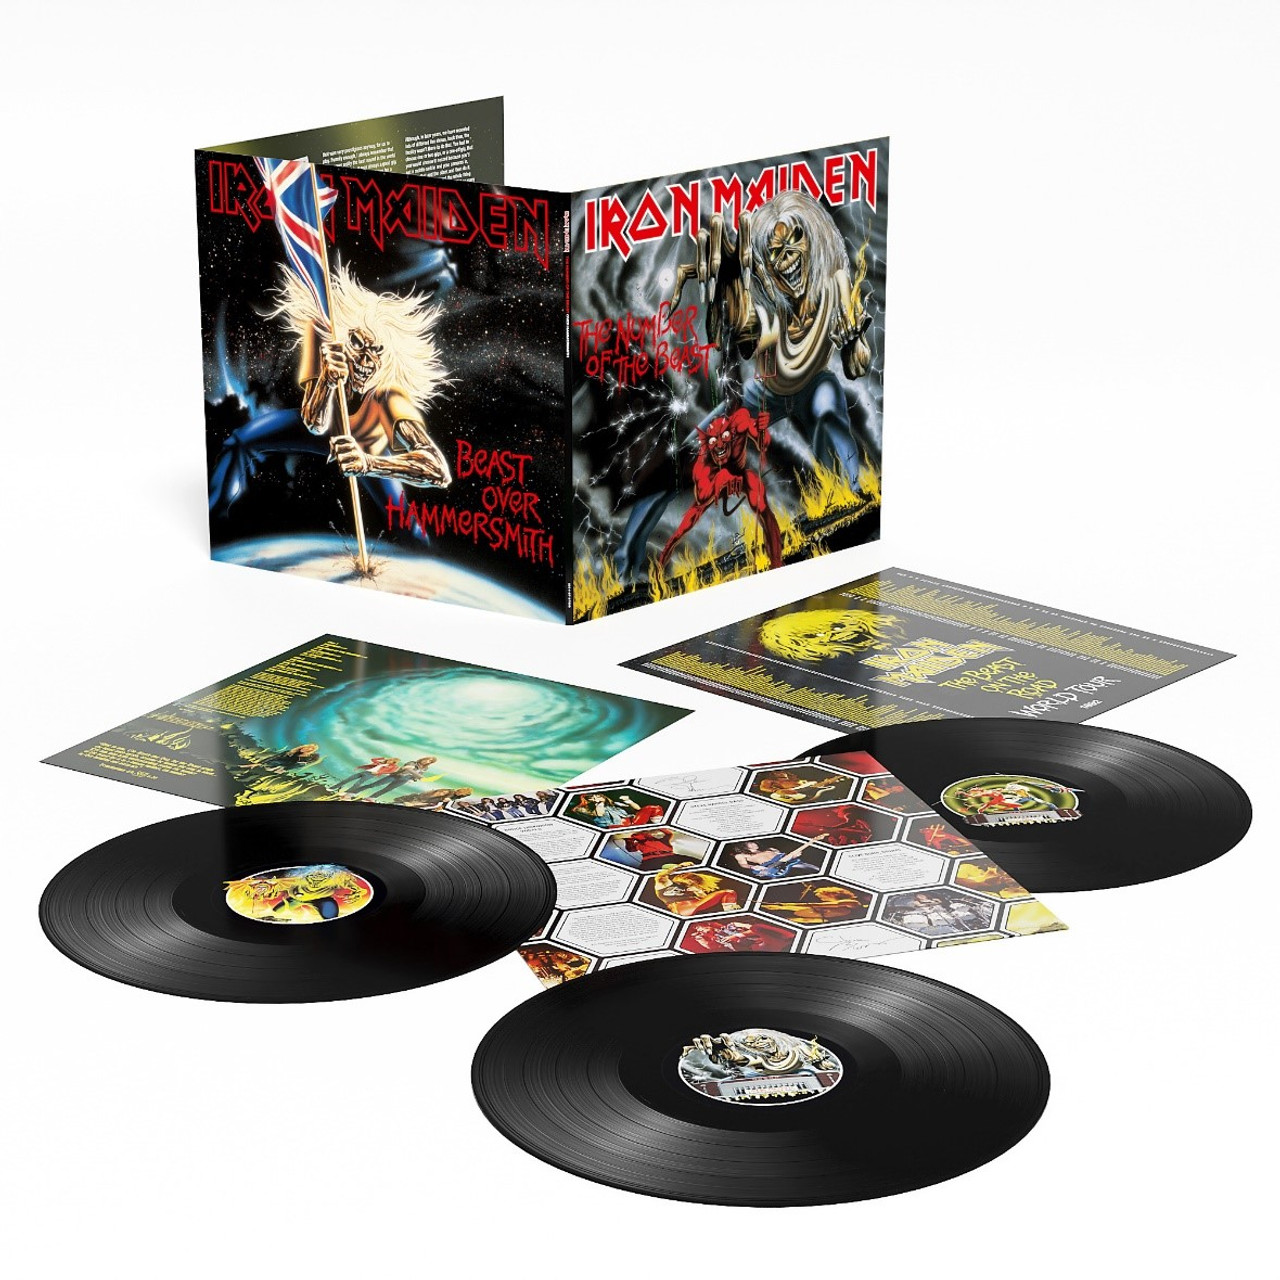 Iron Maiden 'The Number of the Beast + Beast Over Hammersmith' 40th Anniversary 3LP 180g Black Vinyl